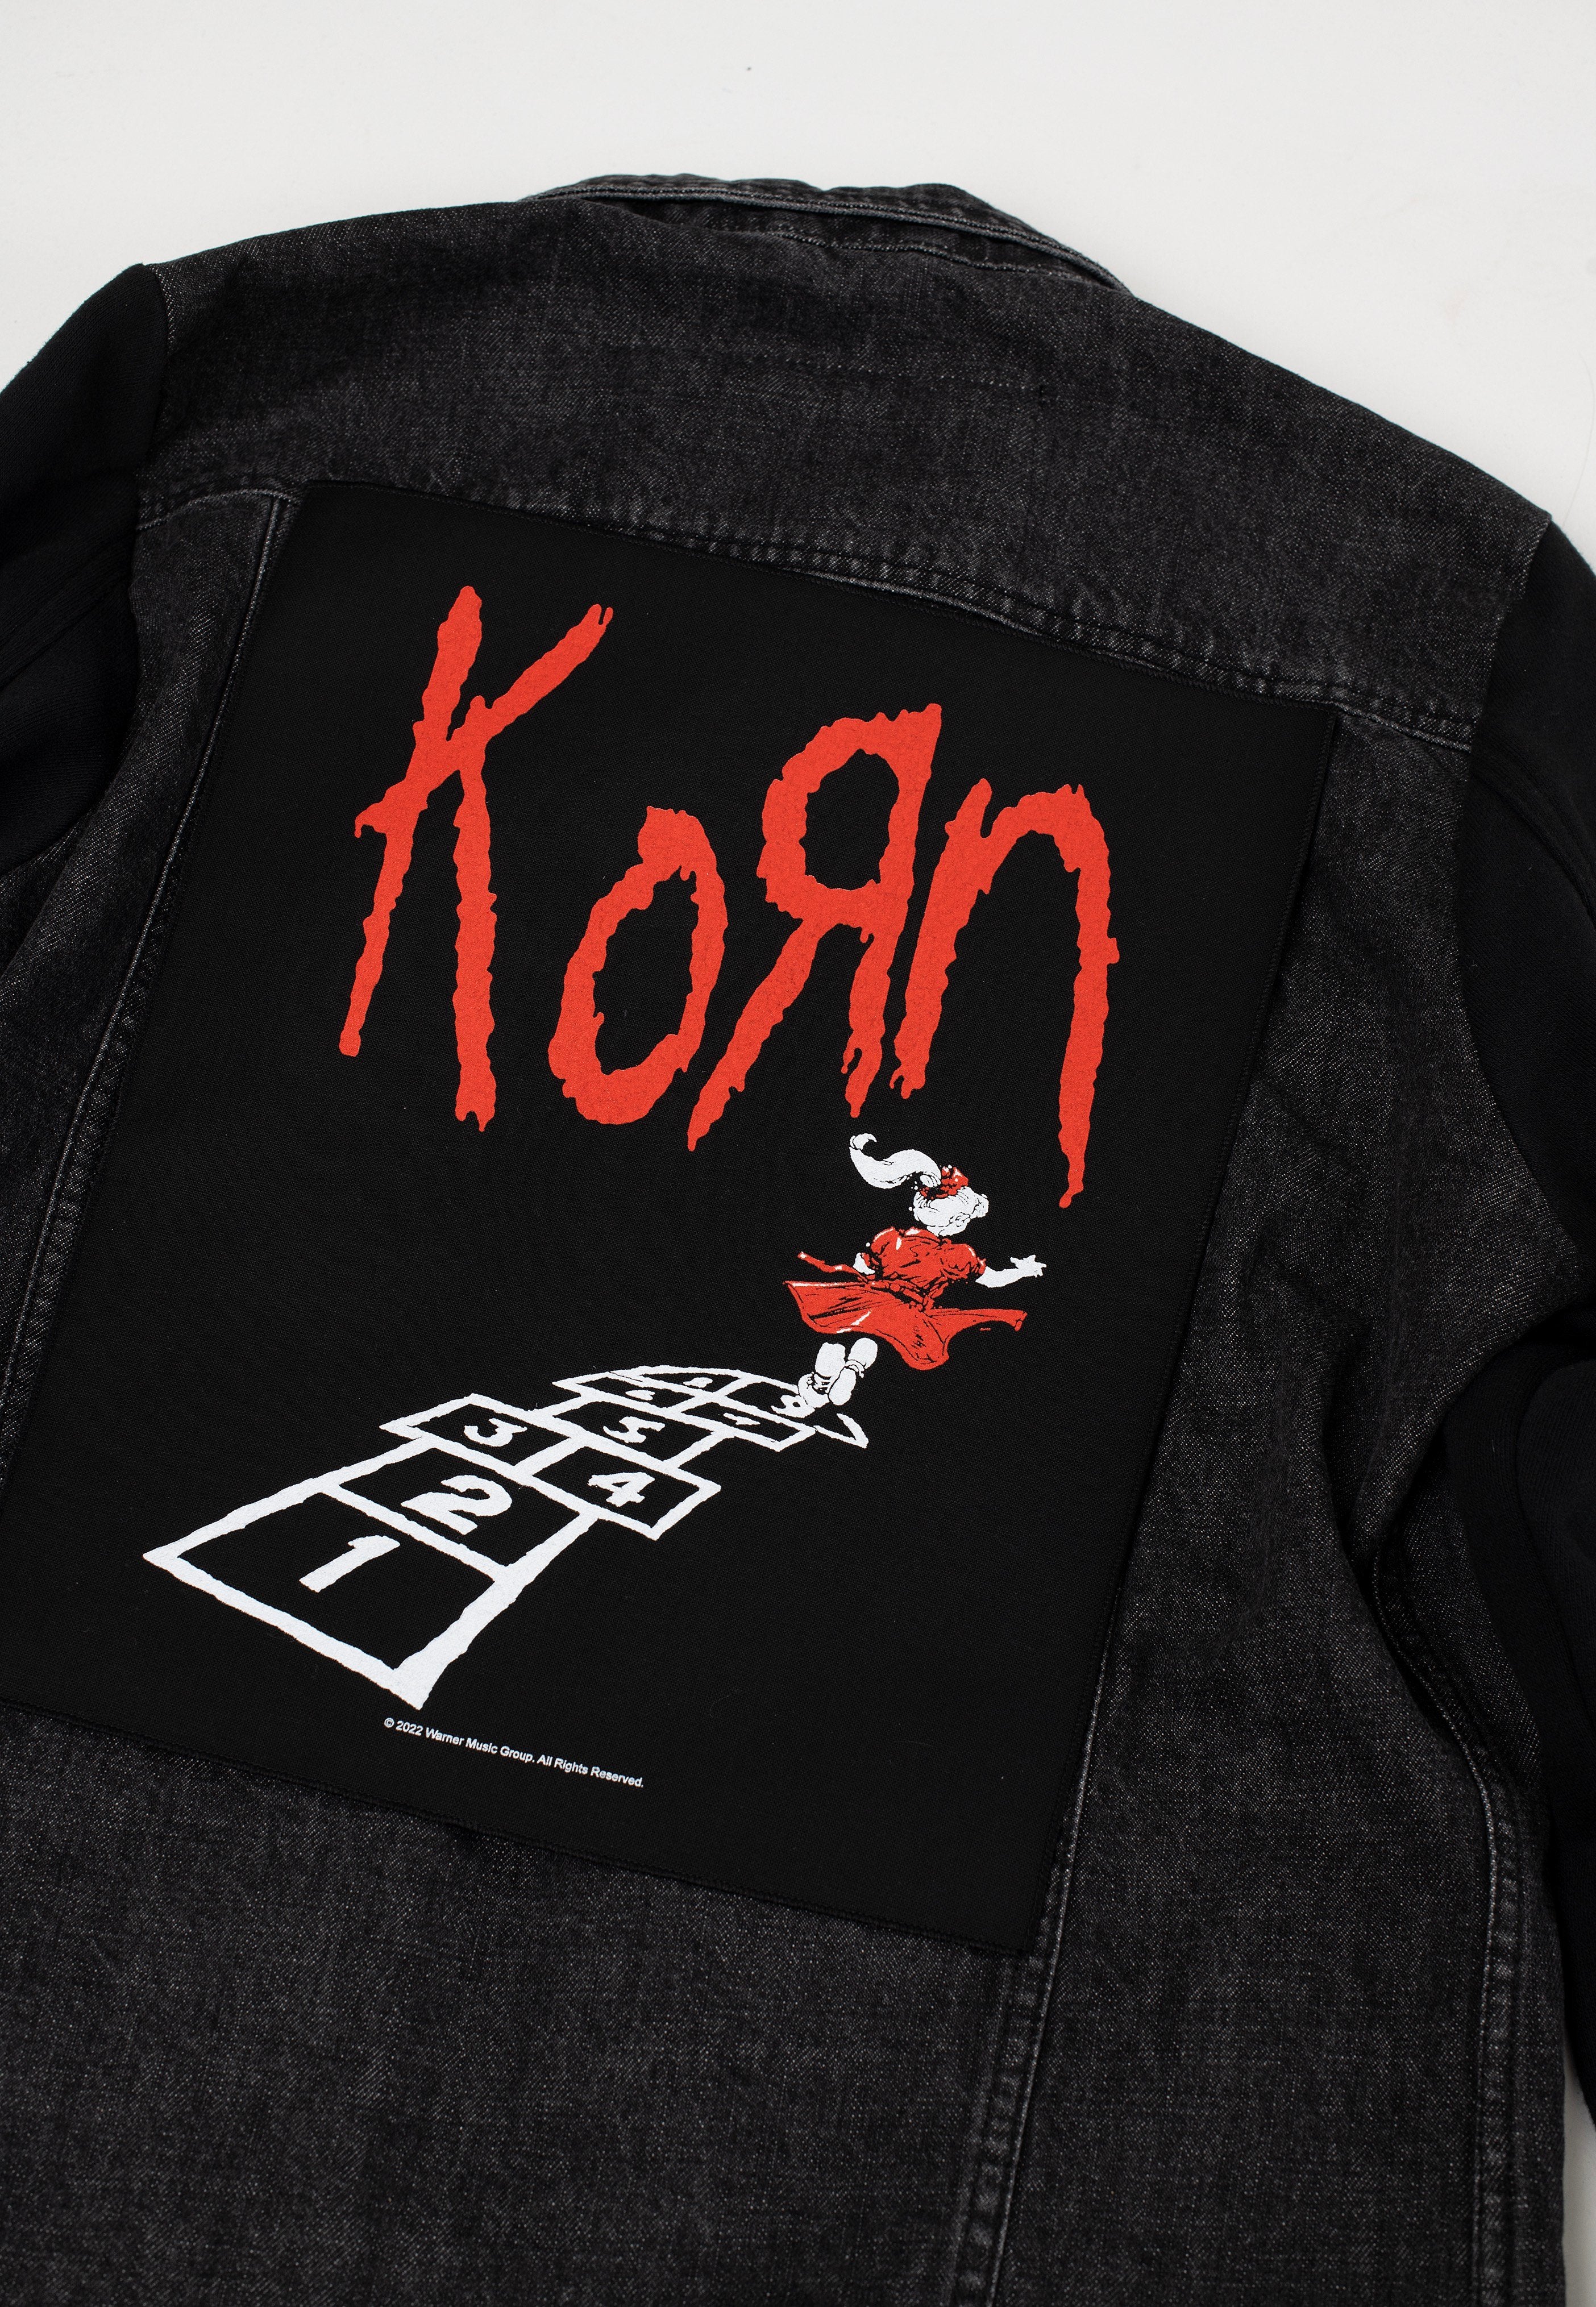 Korn - Follow The Leader - Backpatch